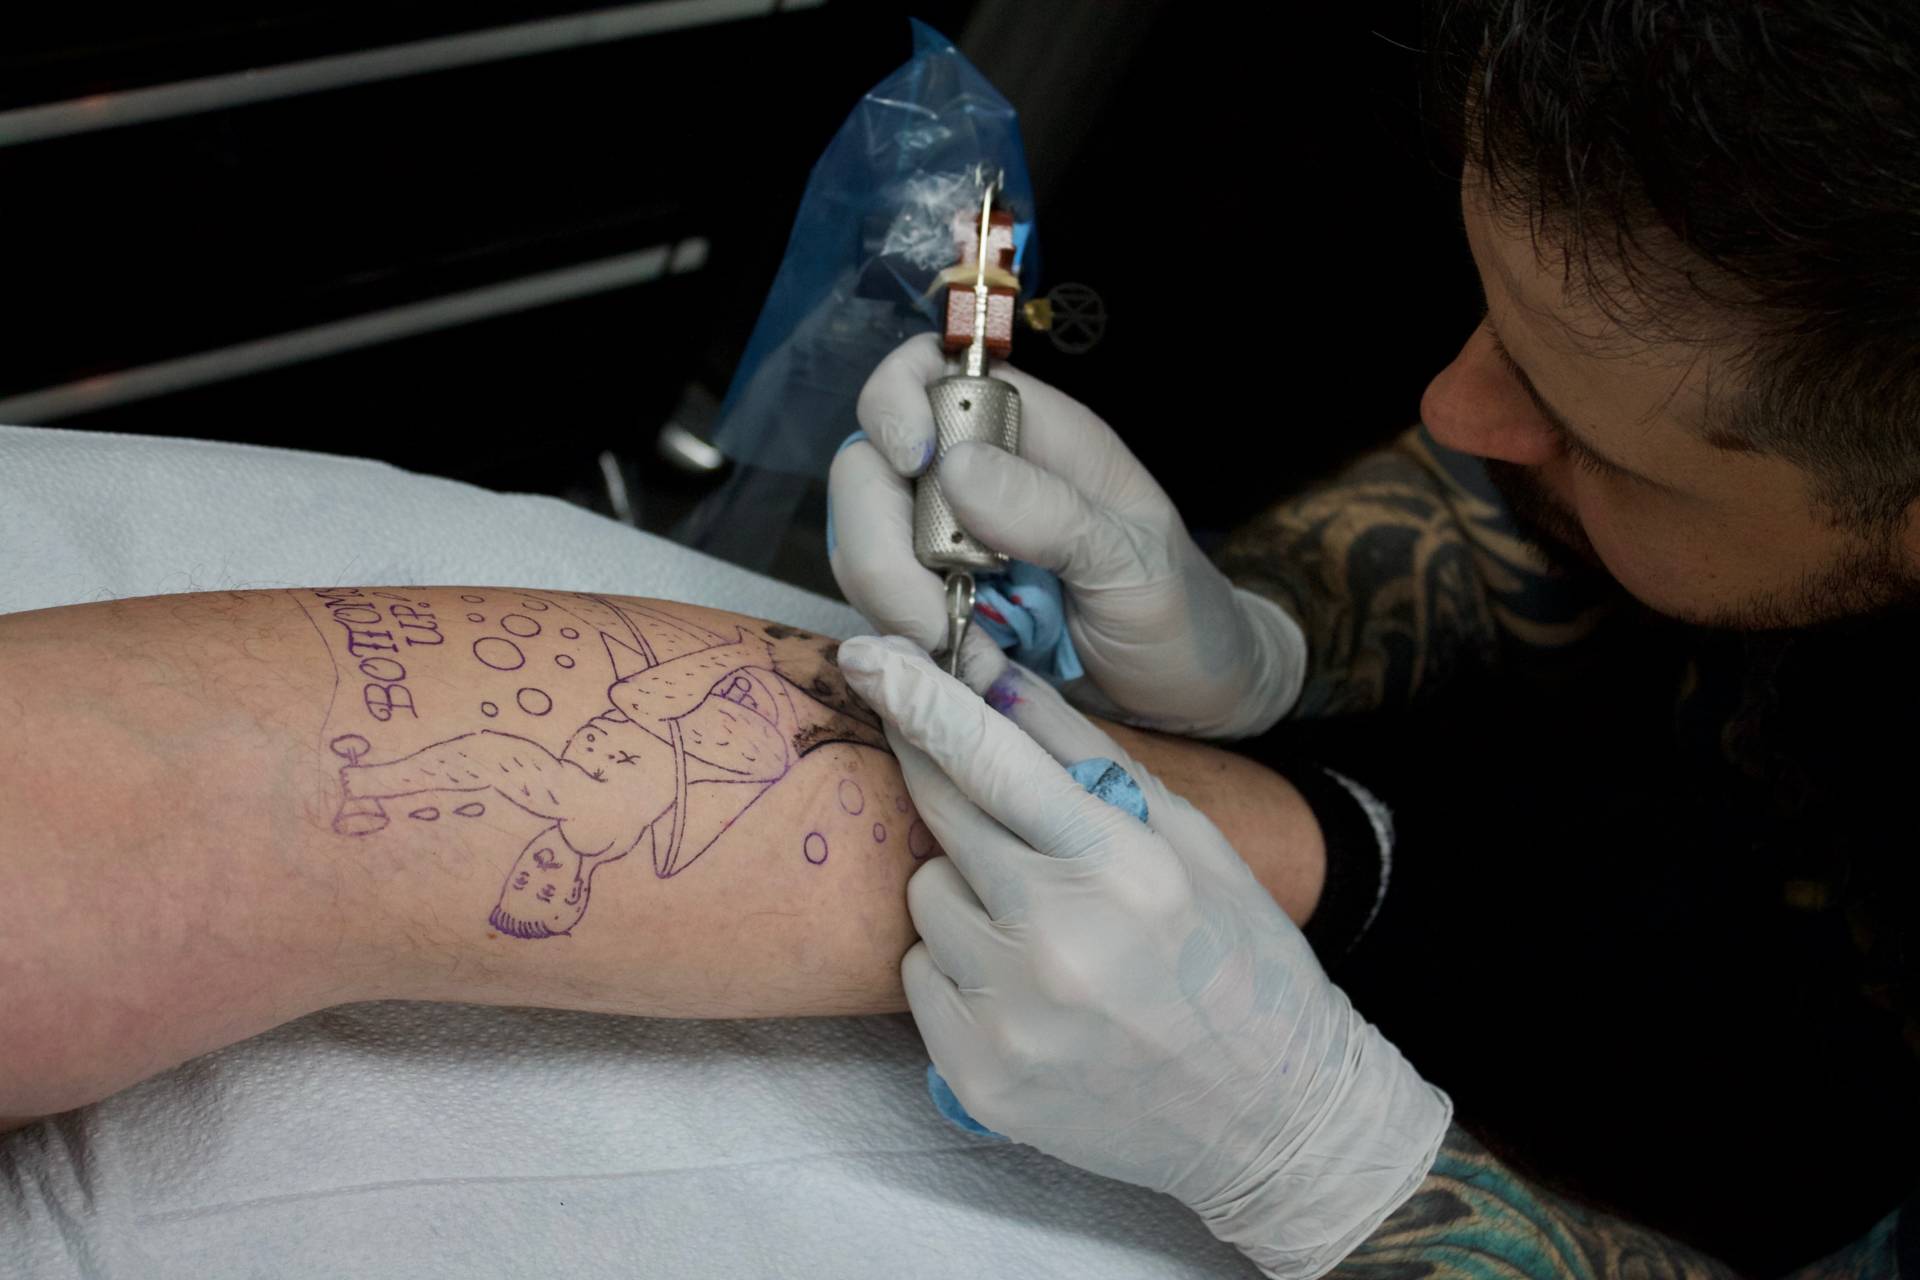 Nick Bergin, owner of Godspeed Tattoo, works on a male pin-up design in San Mateo, California on Nov. 14, 2017. Audrey Garces/KQED